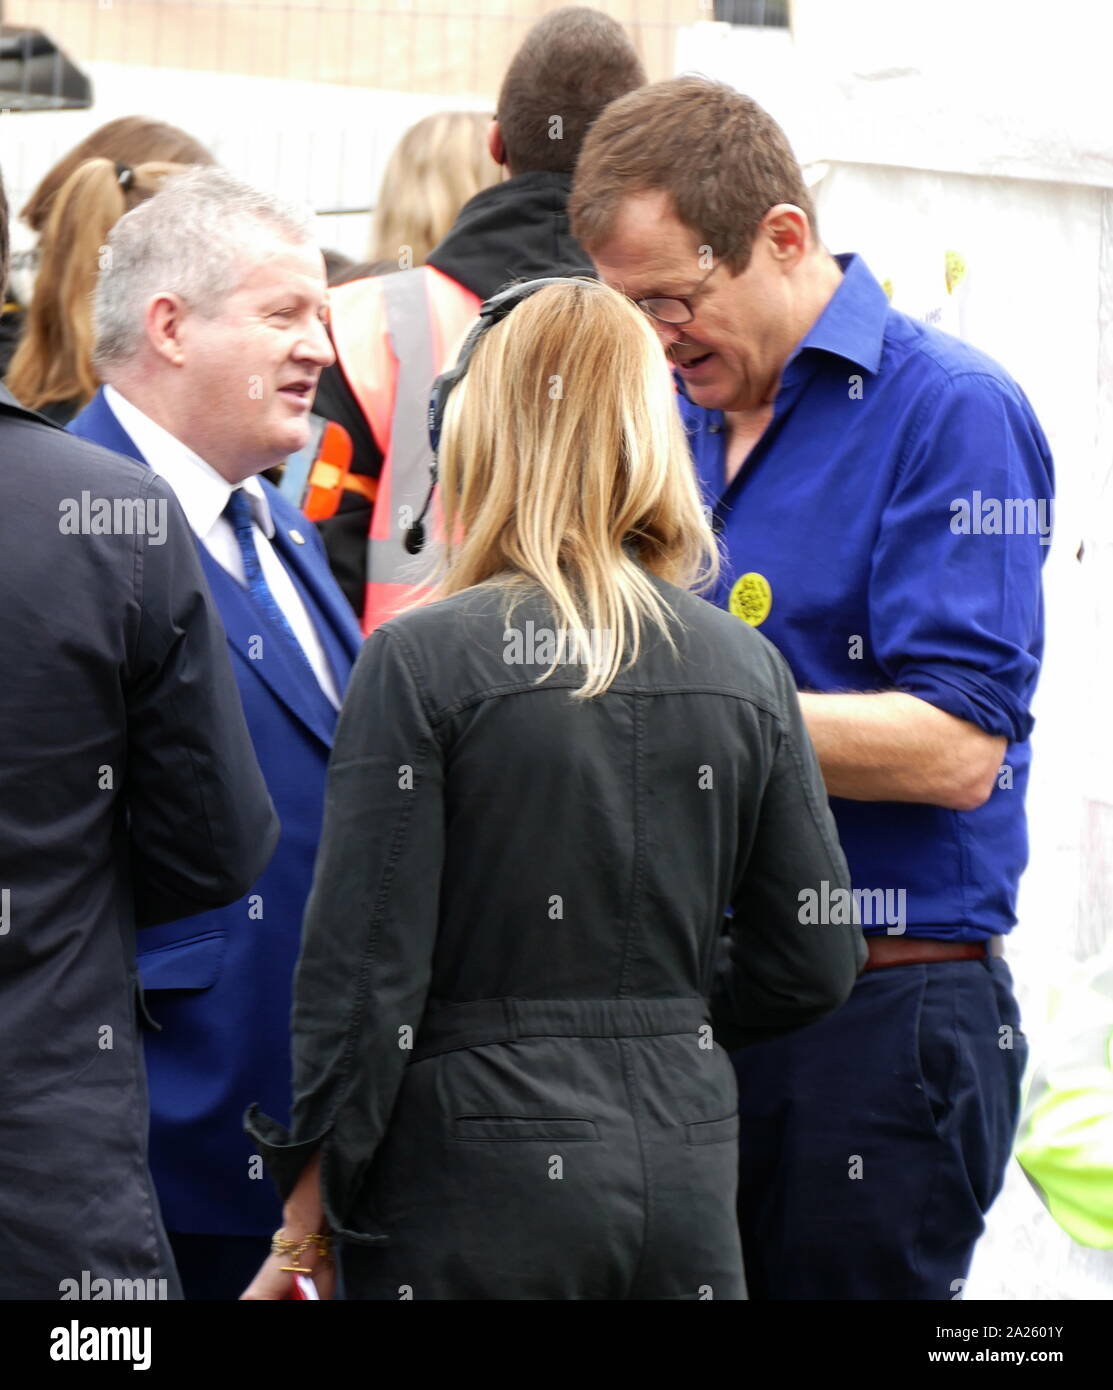 Alastair Campbell, former Labour Press consultant and spin doctor (right), with Ian Blackford, Scottish National Party Member of Parliament for Ross, Skye and Lochaber, leader of the SNP Westminster Group, at the 'People's Vote' march in Parliament Square, London. The People's Vote march took place in London on 23 March 2019 as part of a series of demonstrations to protest against Brexit, call for a new referendum, and ask the British Government to revoke Article 50. It brought to the capital hundreds of thousands of protestors, or over a million people according to the organizers. Stock Photo